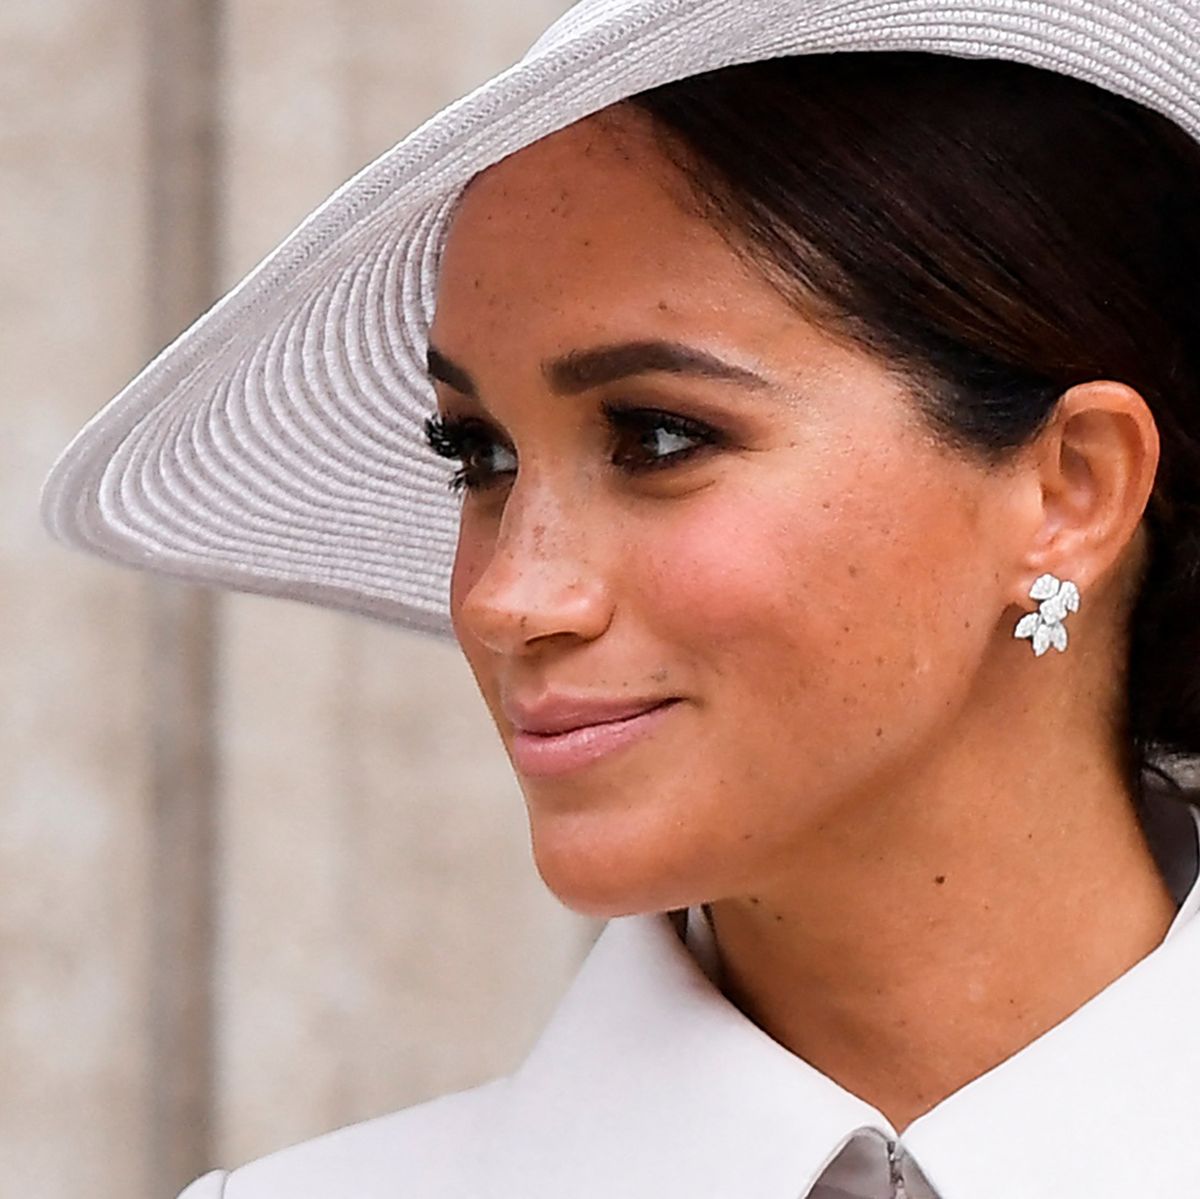 Meghan Markle's Favorite Accessories, Where to Buy